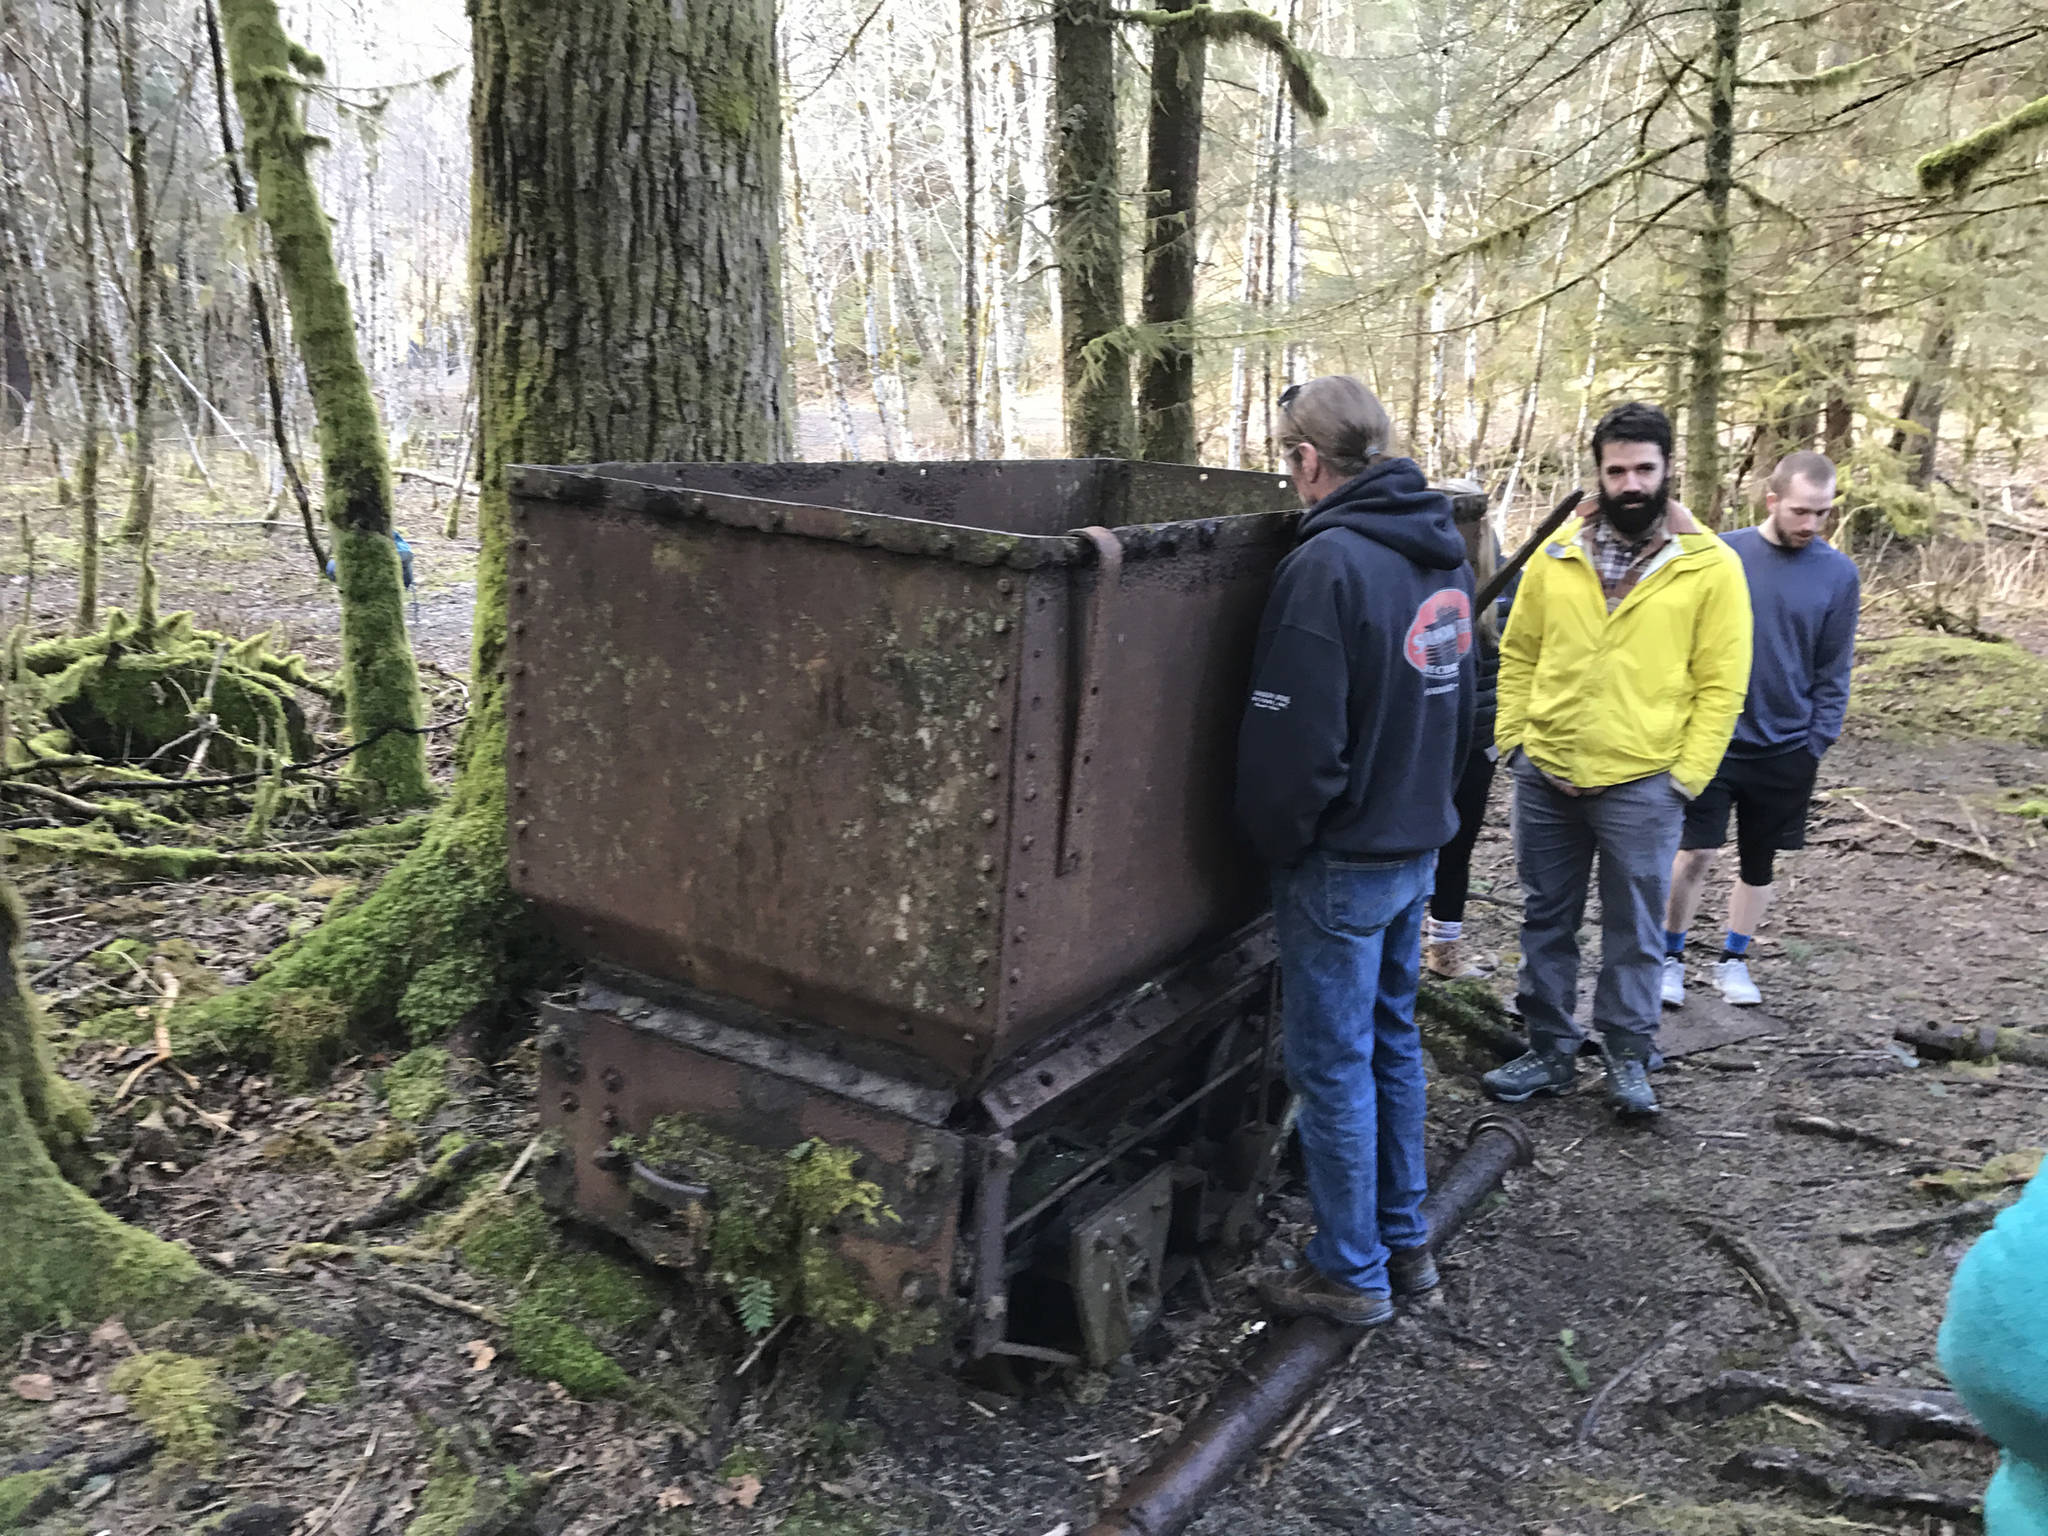 Numerous artifacts remain where the mine used to be, including mine carts, railways and the foundations of buildings from the town of Treadwell. (Alex McCarthy | Juneau Empire)